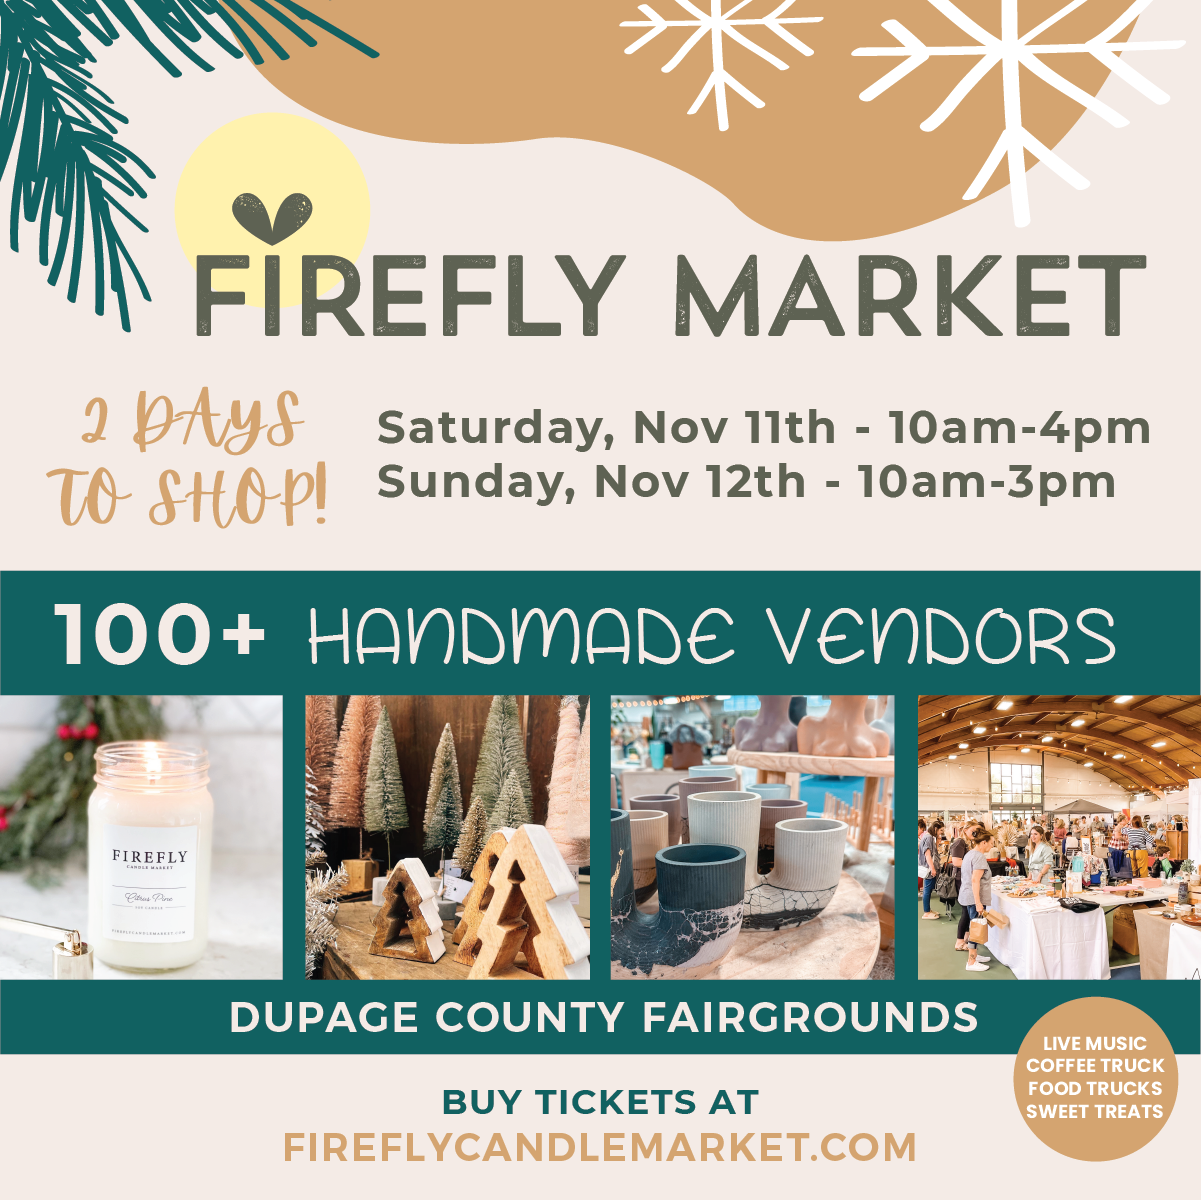 Firefly Market Holiday DuPage Event Center & Fairgrounds.